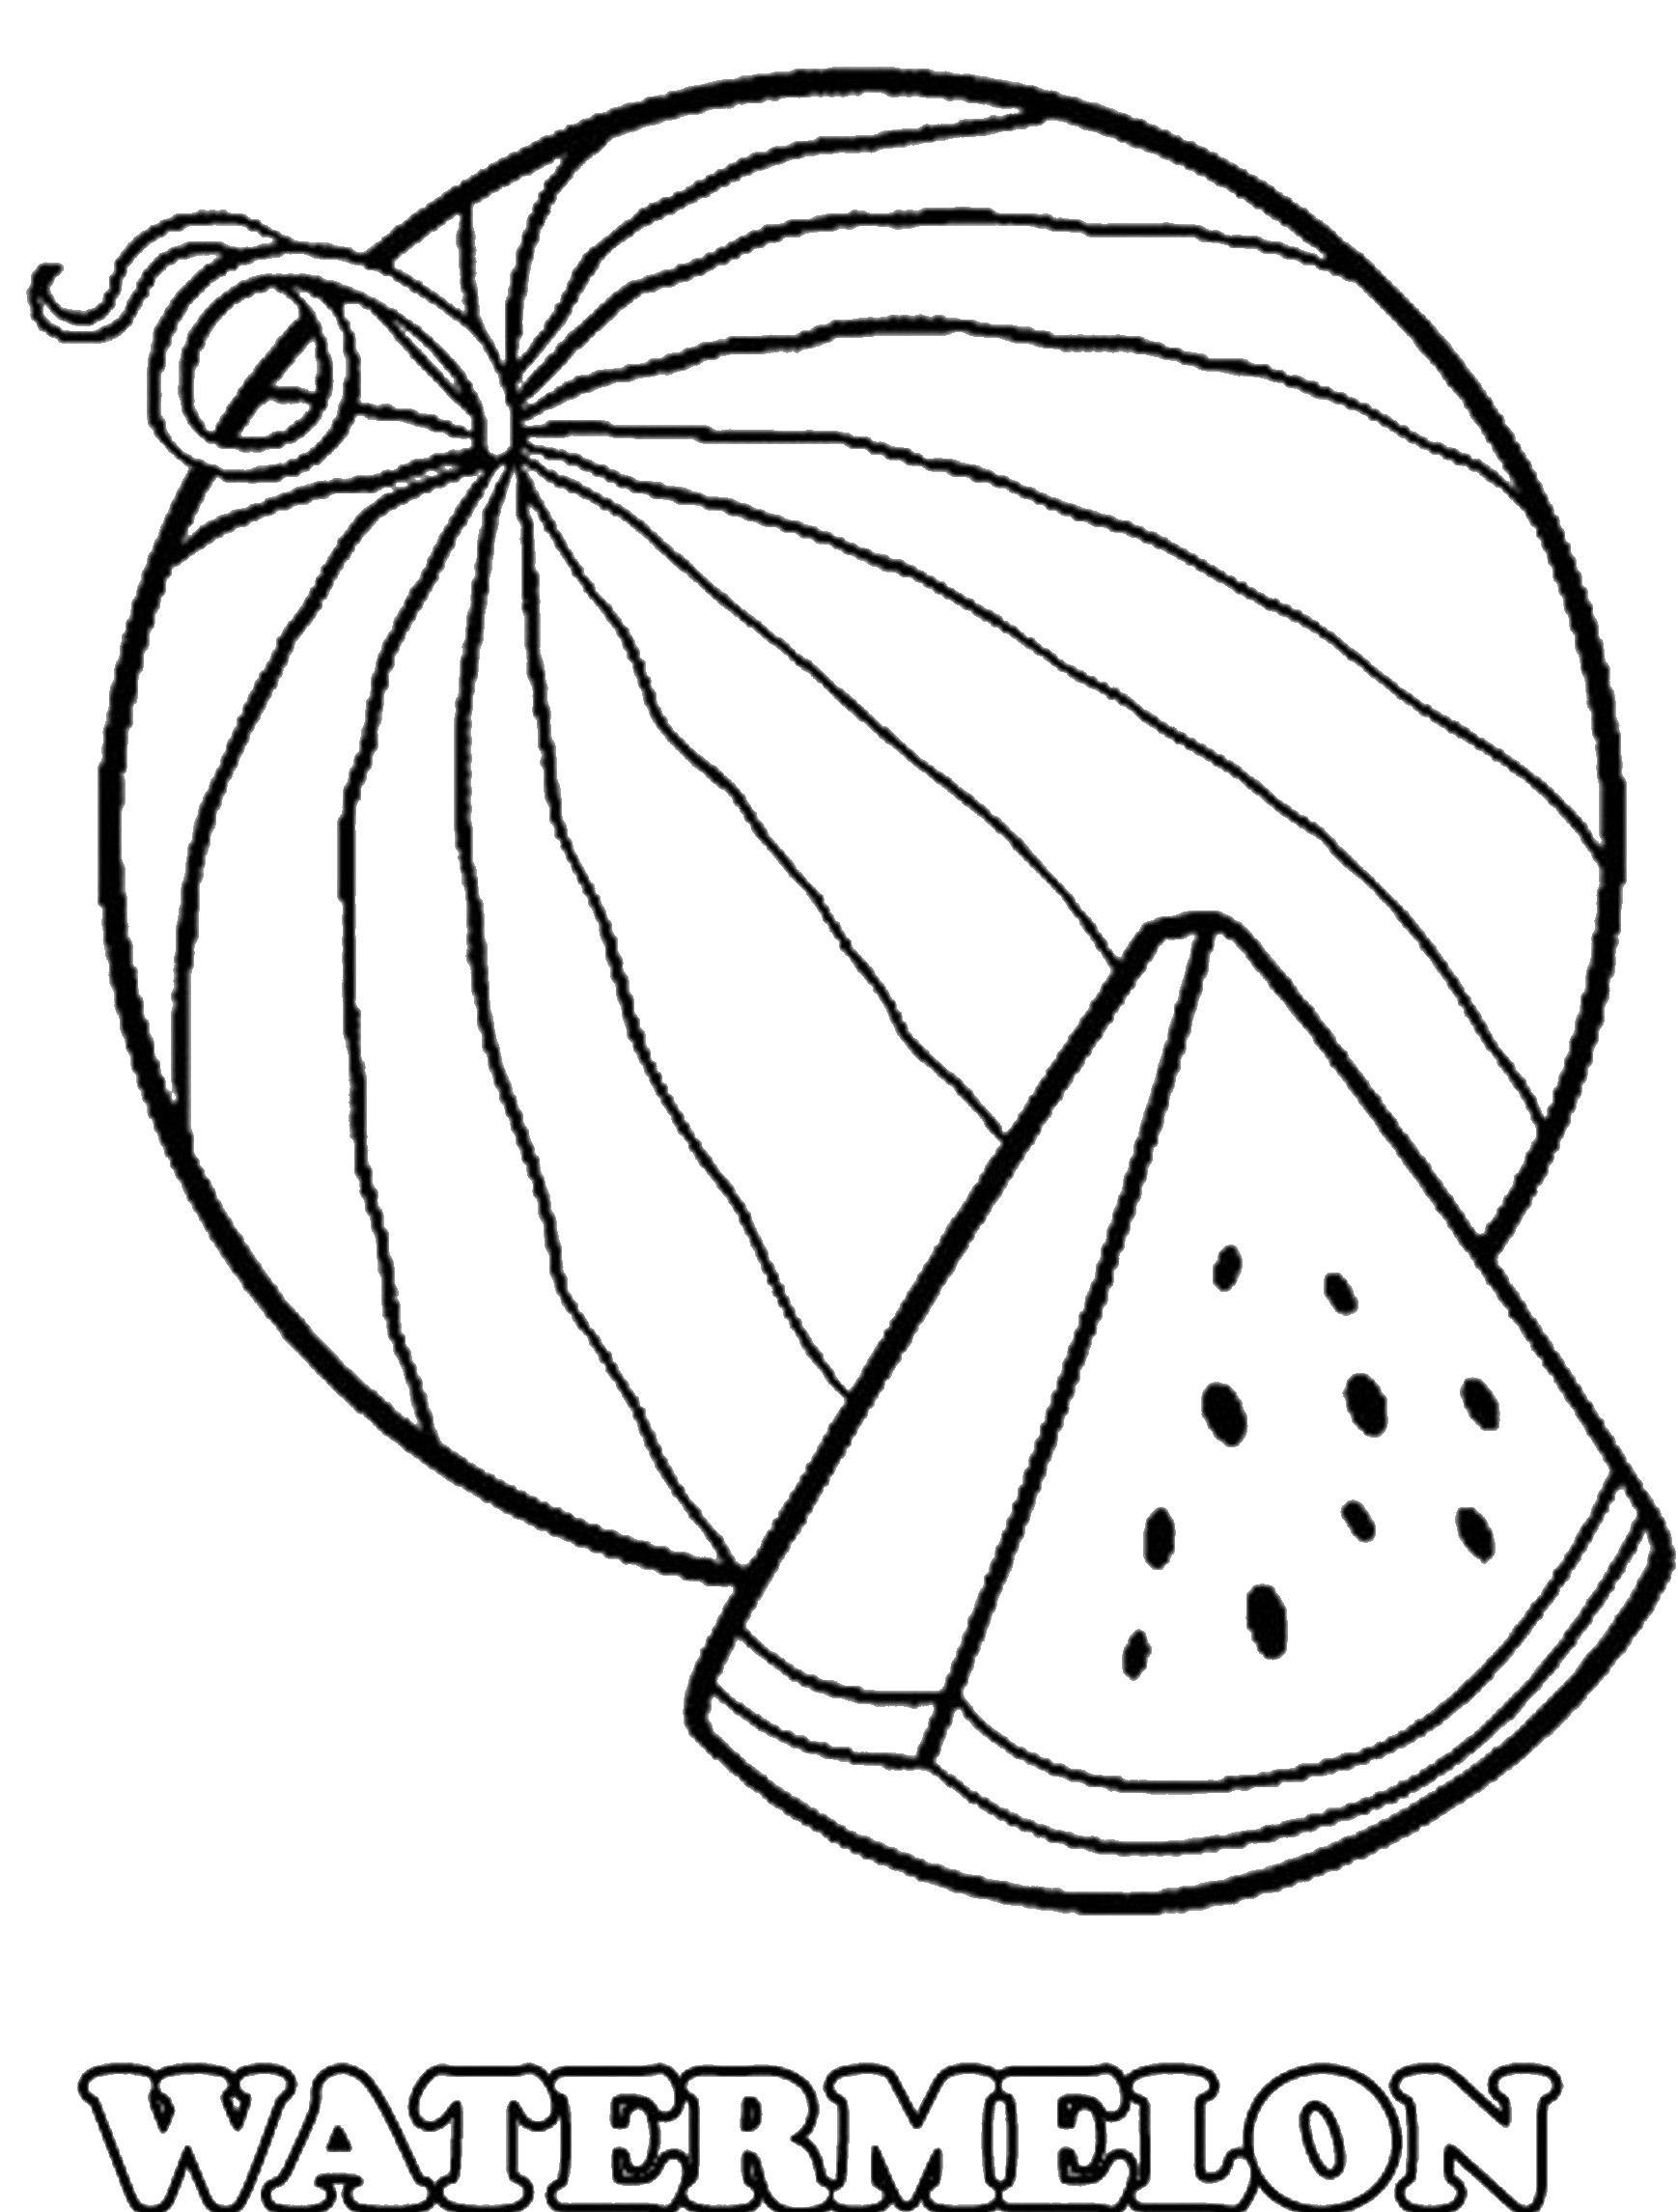 Coloring Watermelon. Category berries. Tags:  berries, melons.